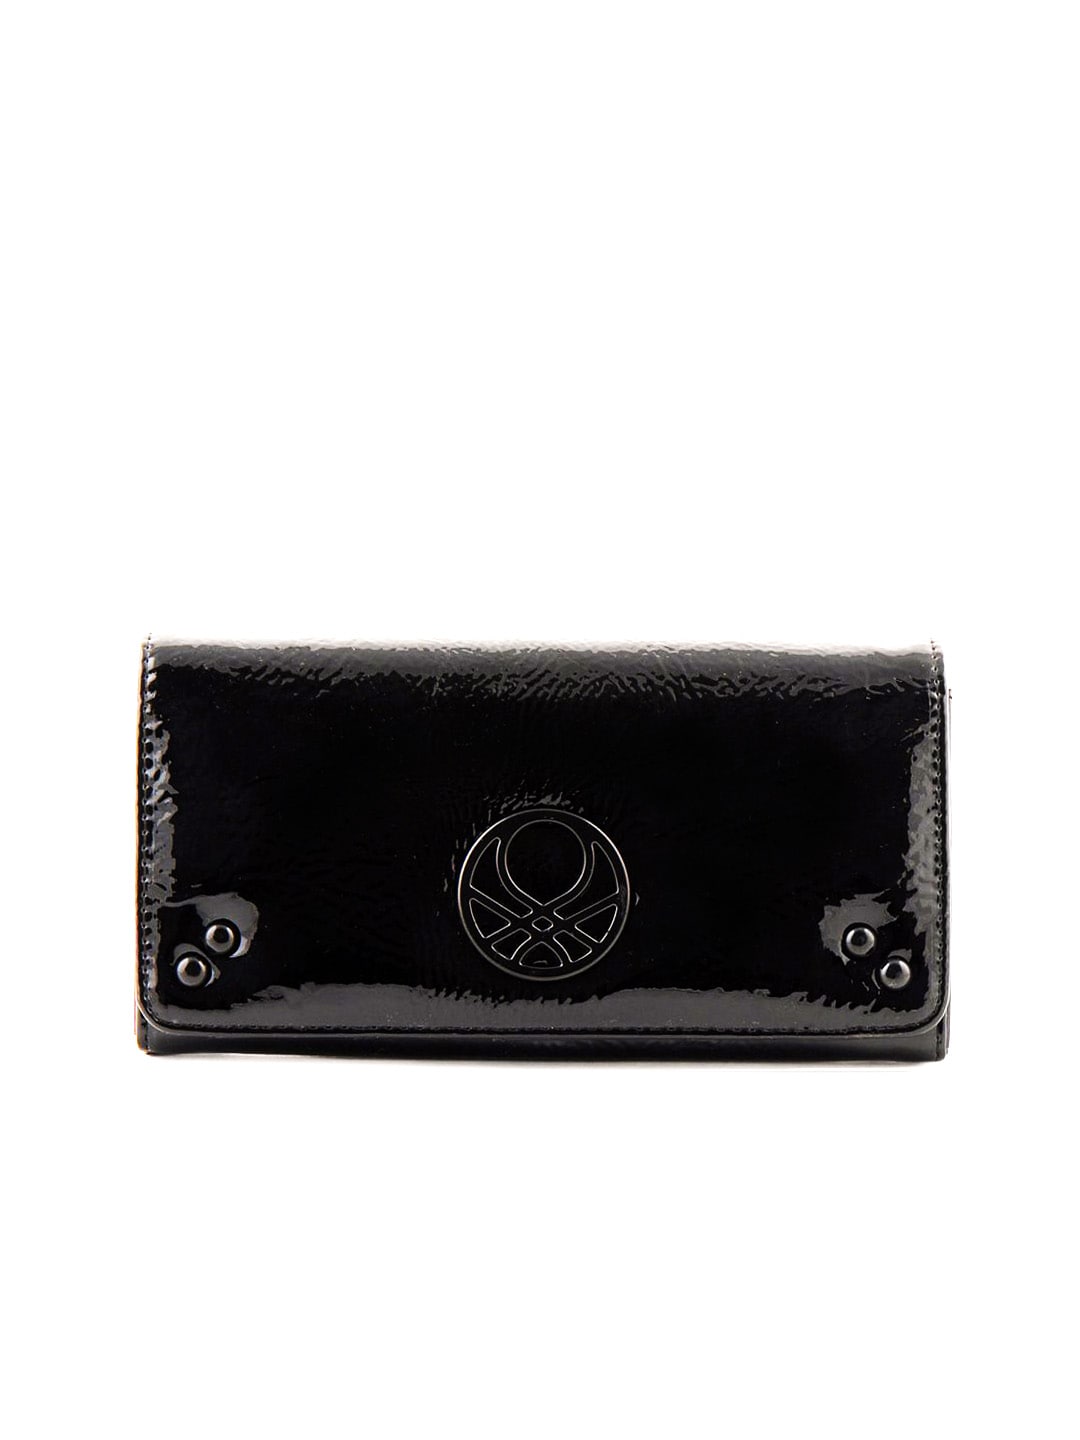 United Colors of Benetton Women Solid Black Wallets